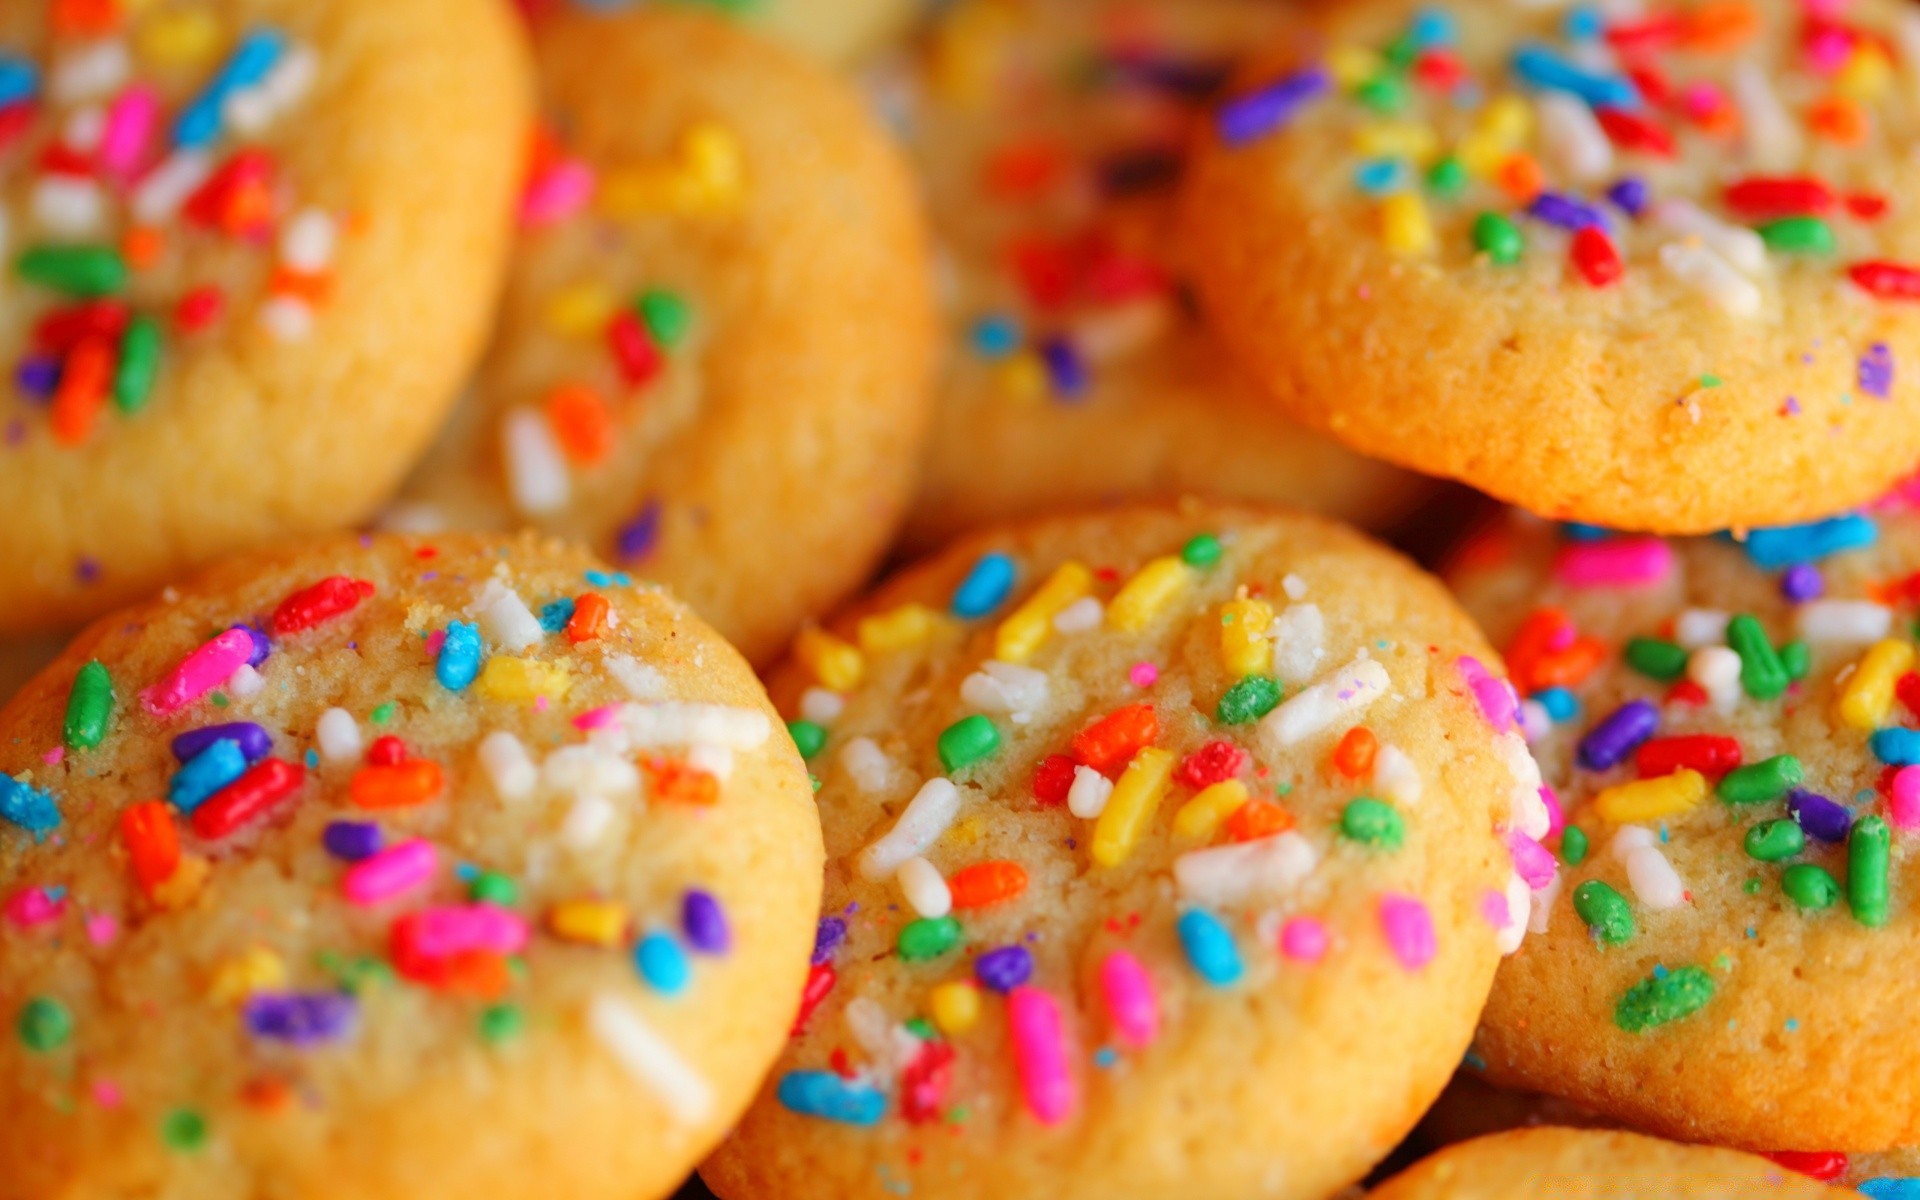 bright colors candy sugar sprinkles delicious traditional cookie food homemade cake sweet chocolate christmas confection celebration easter baking confetti doughnut party